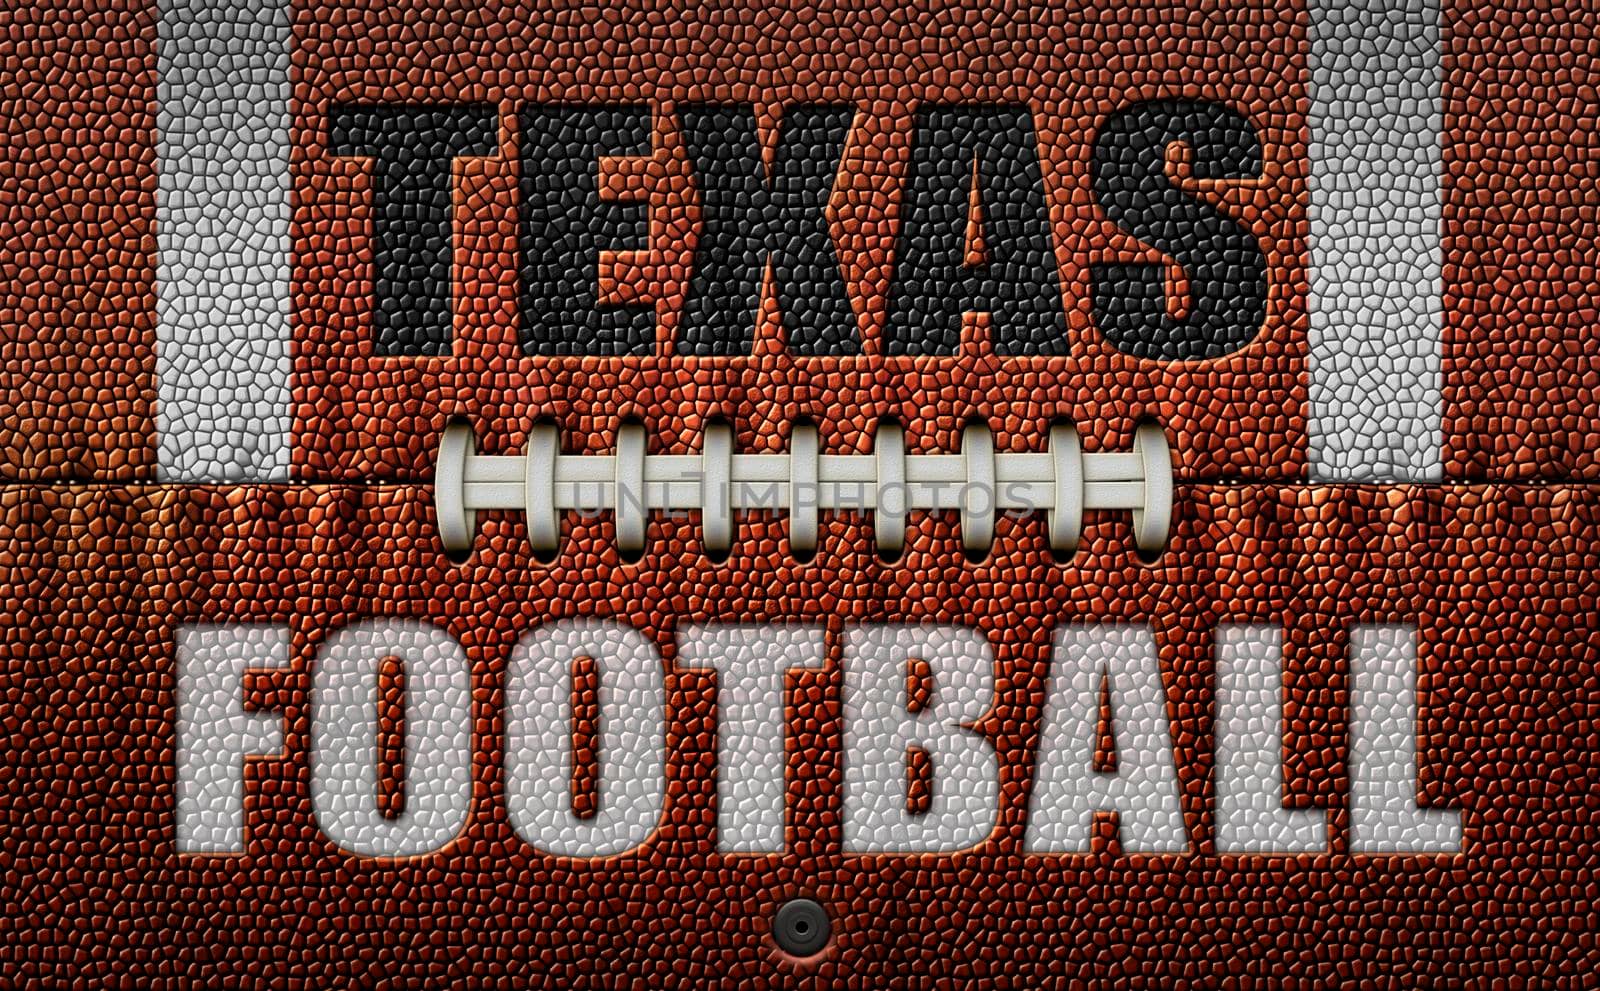 The words, Texas Football, embossed onto a football flattened into two dimensions. 3D Illustration